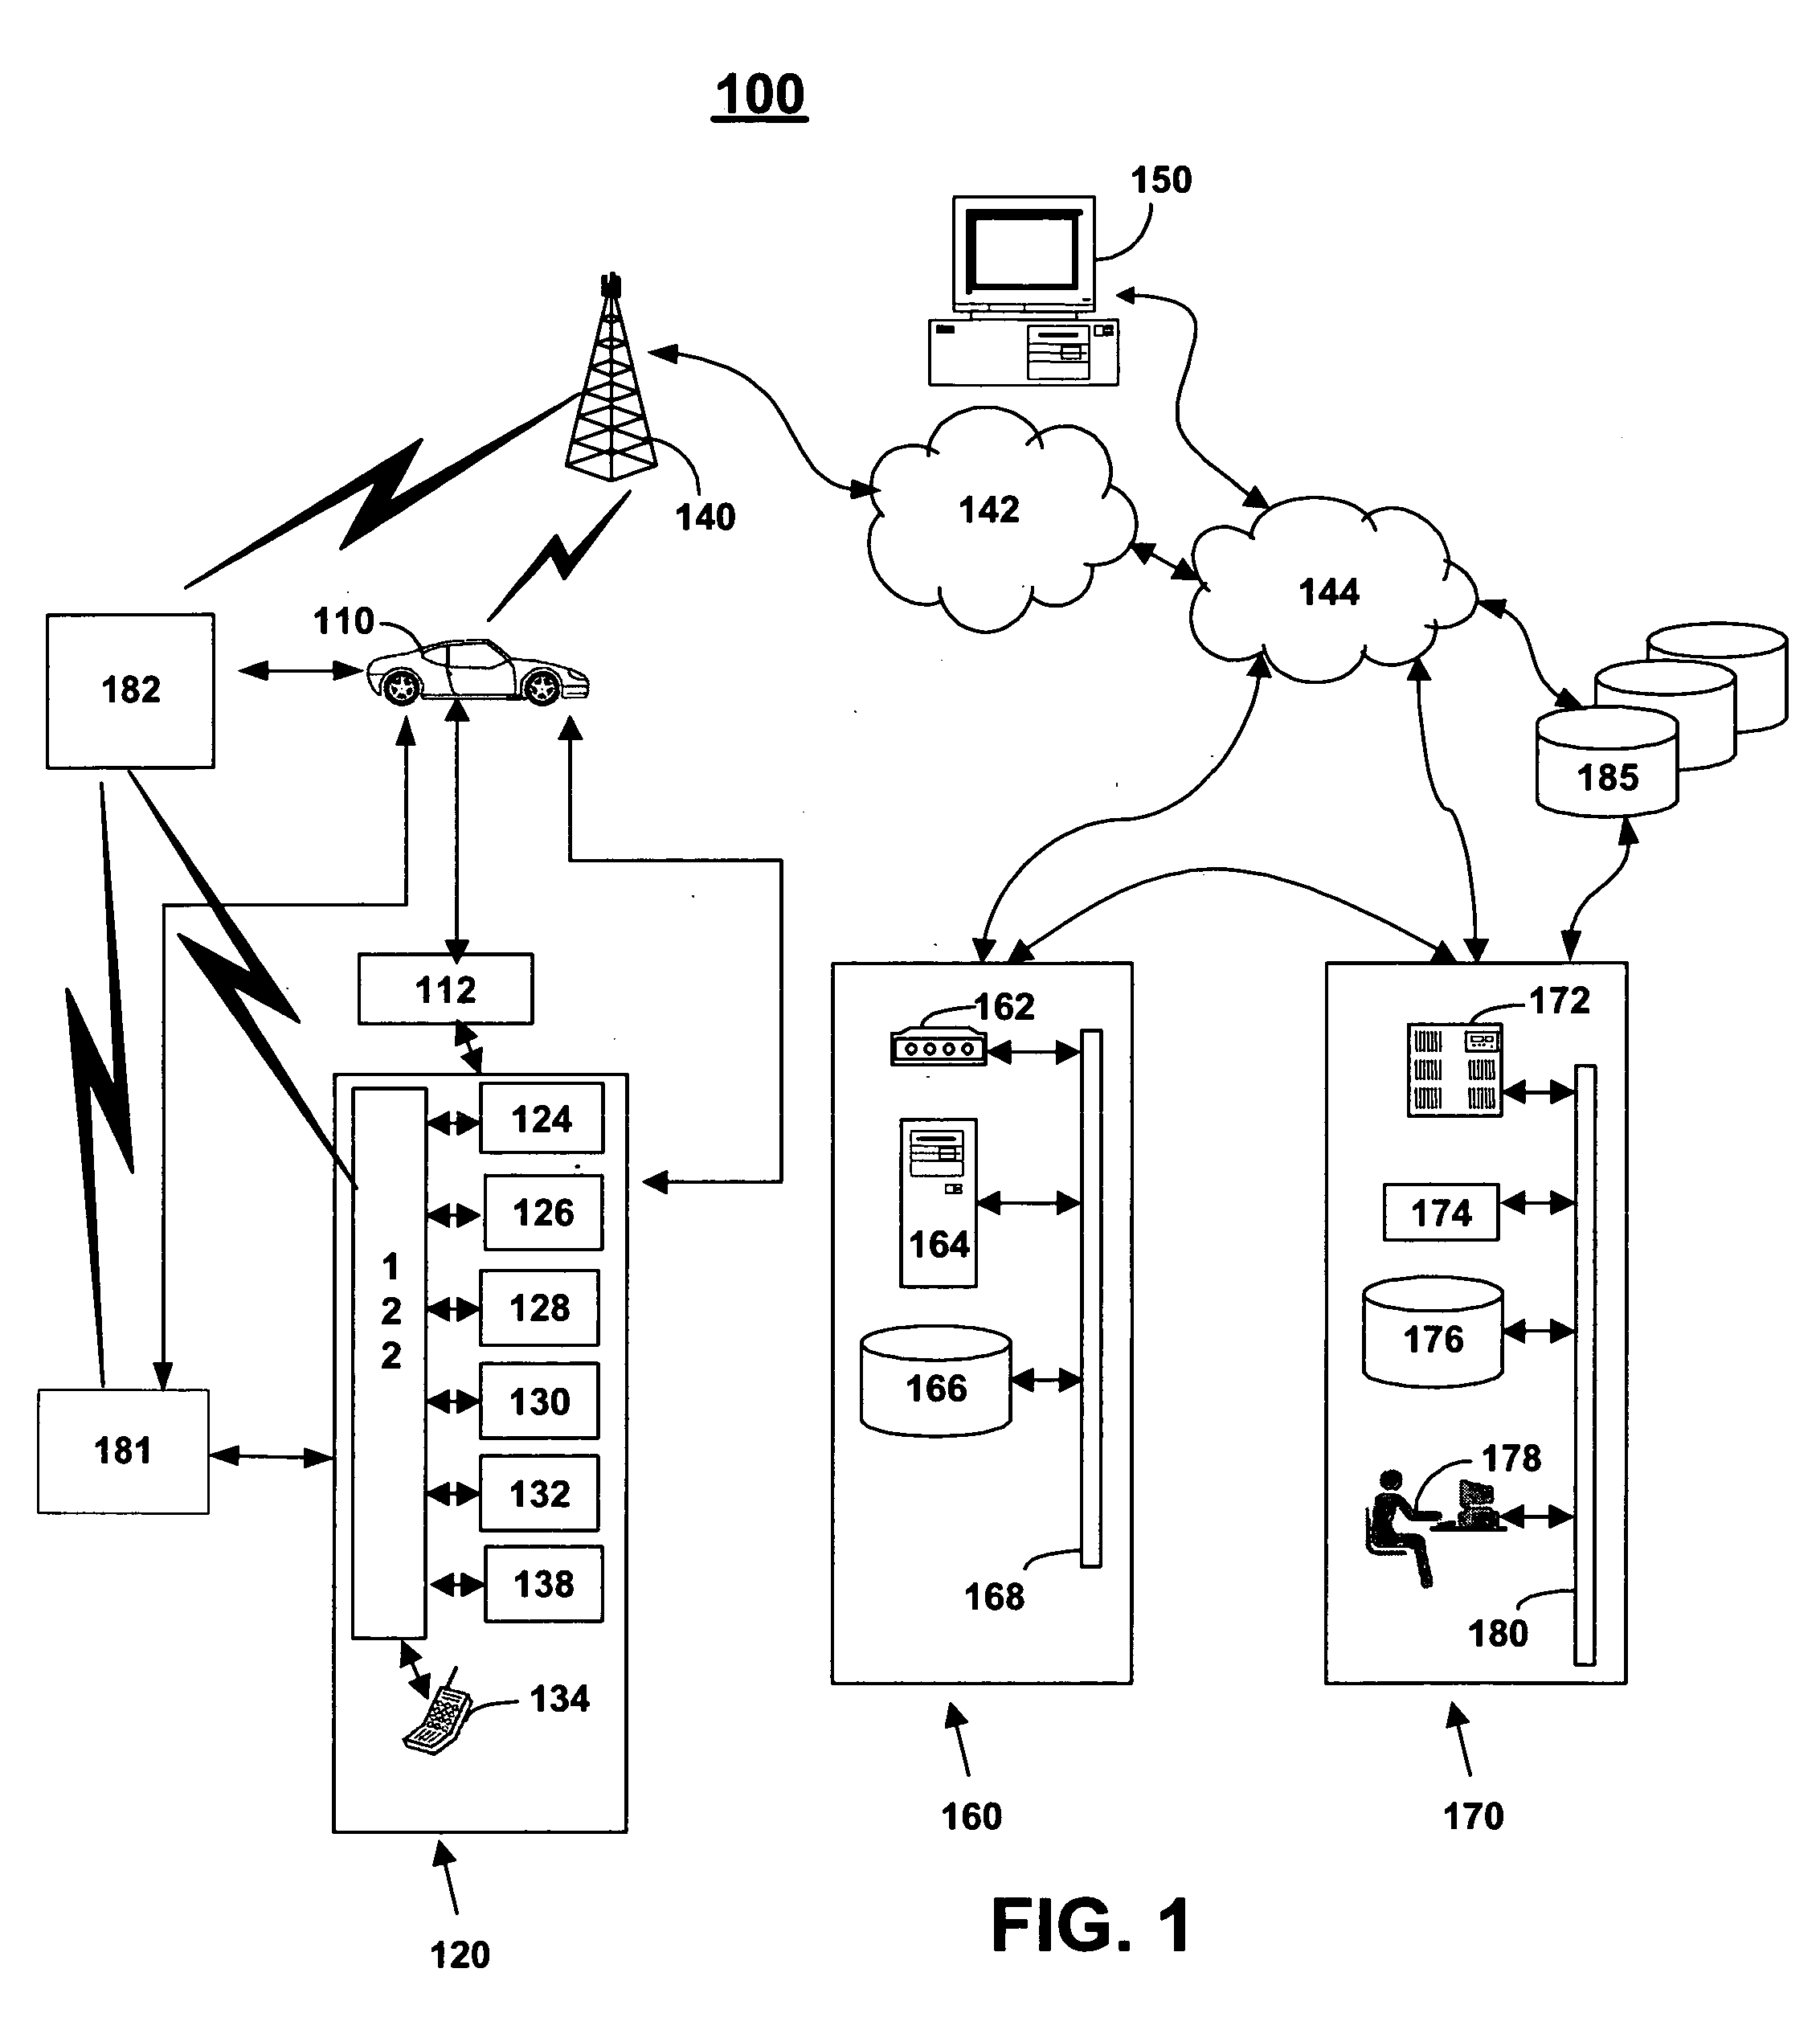 System and method for data storage and diagnostics in a portable communication device interfaced with a telematics unit